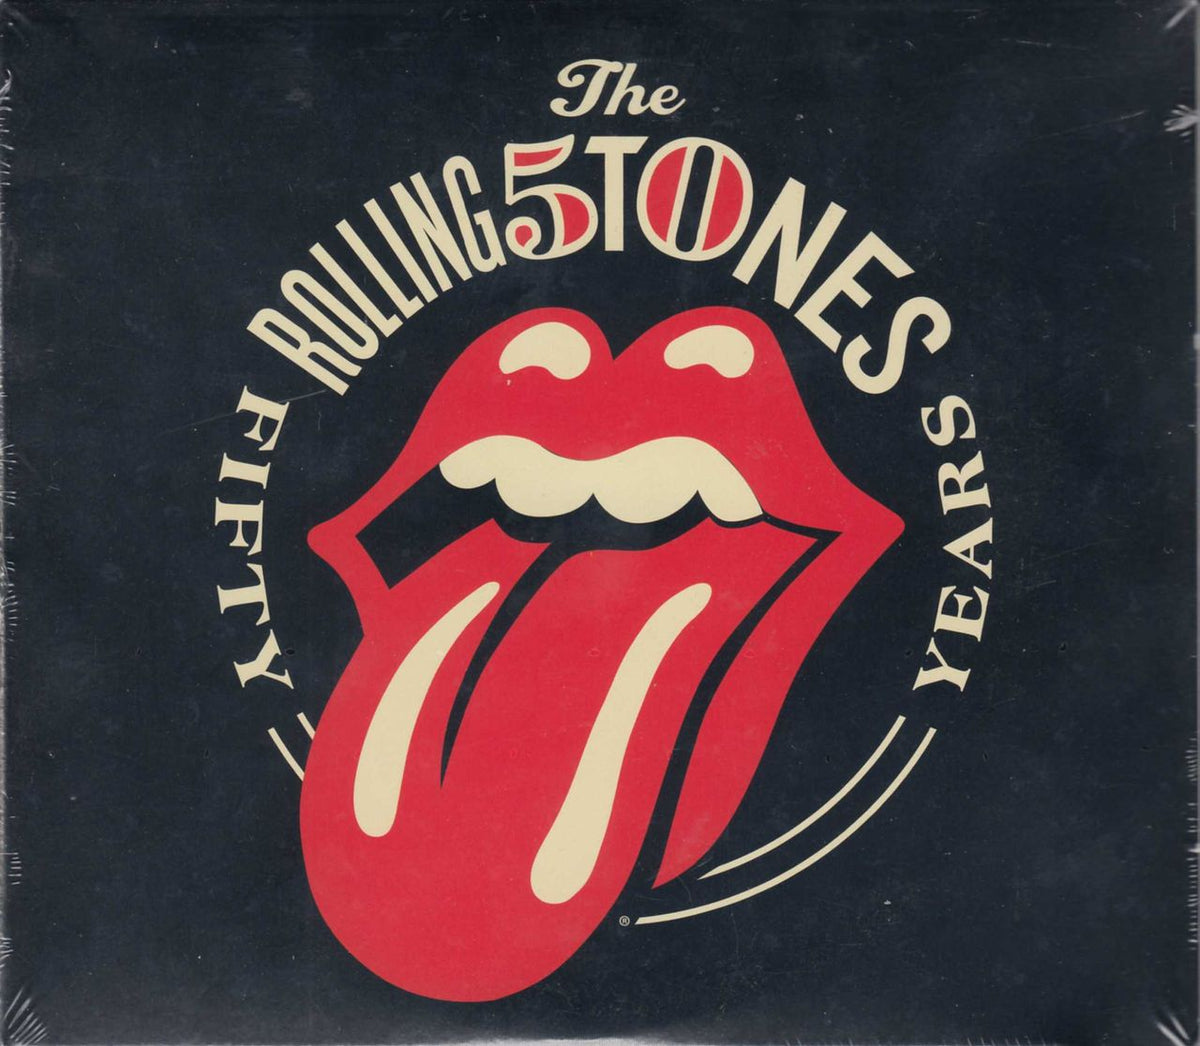 The Rolling Stones Live - The Rolling Stones Fifty Years - Sealed Cana —  RareVinyl.com